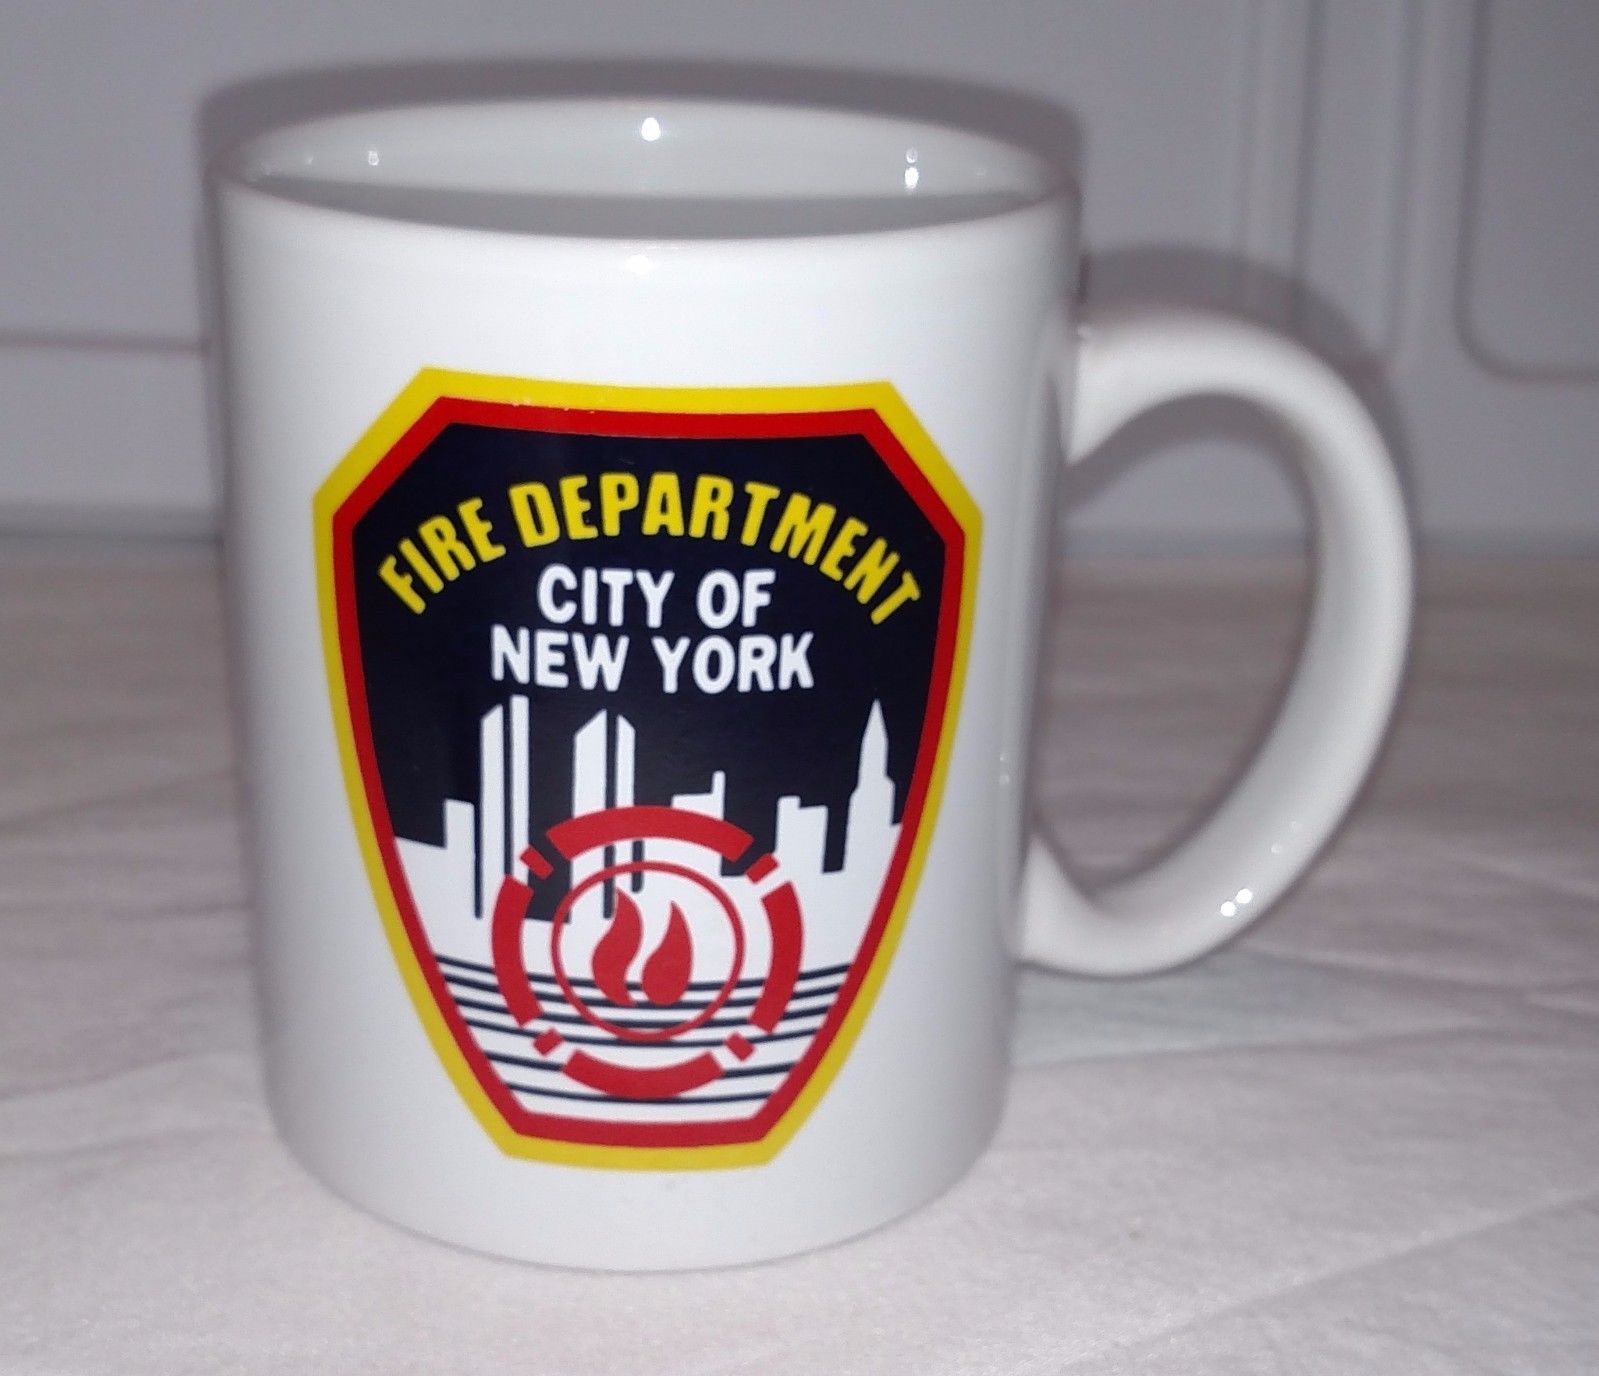 Primary image for FDNY City of New York MUG Fire Department COFFEE CUP Glass Dept NY City Souvenir